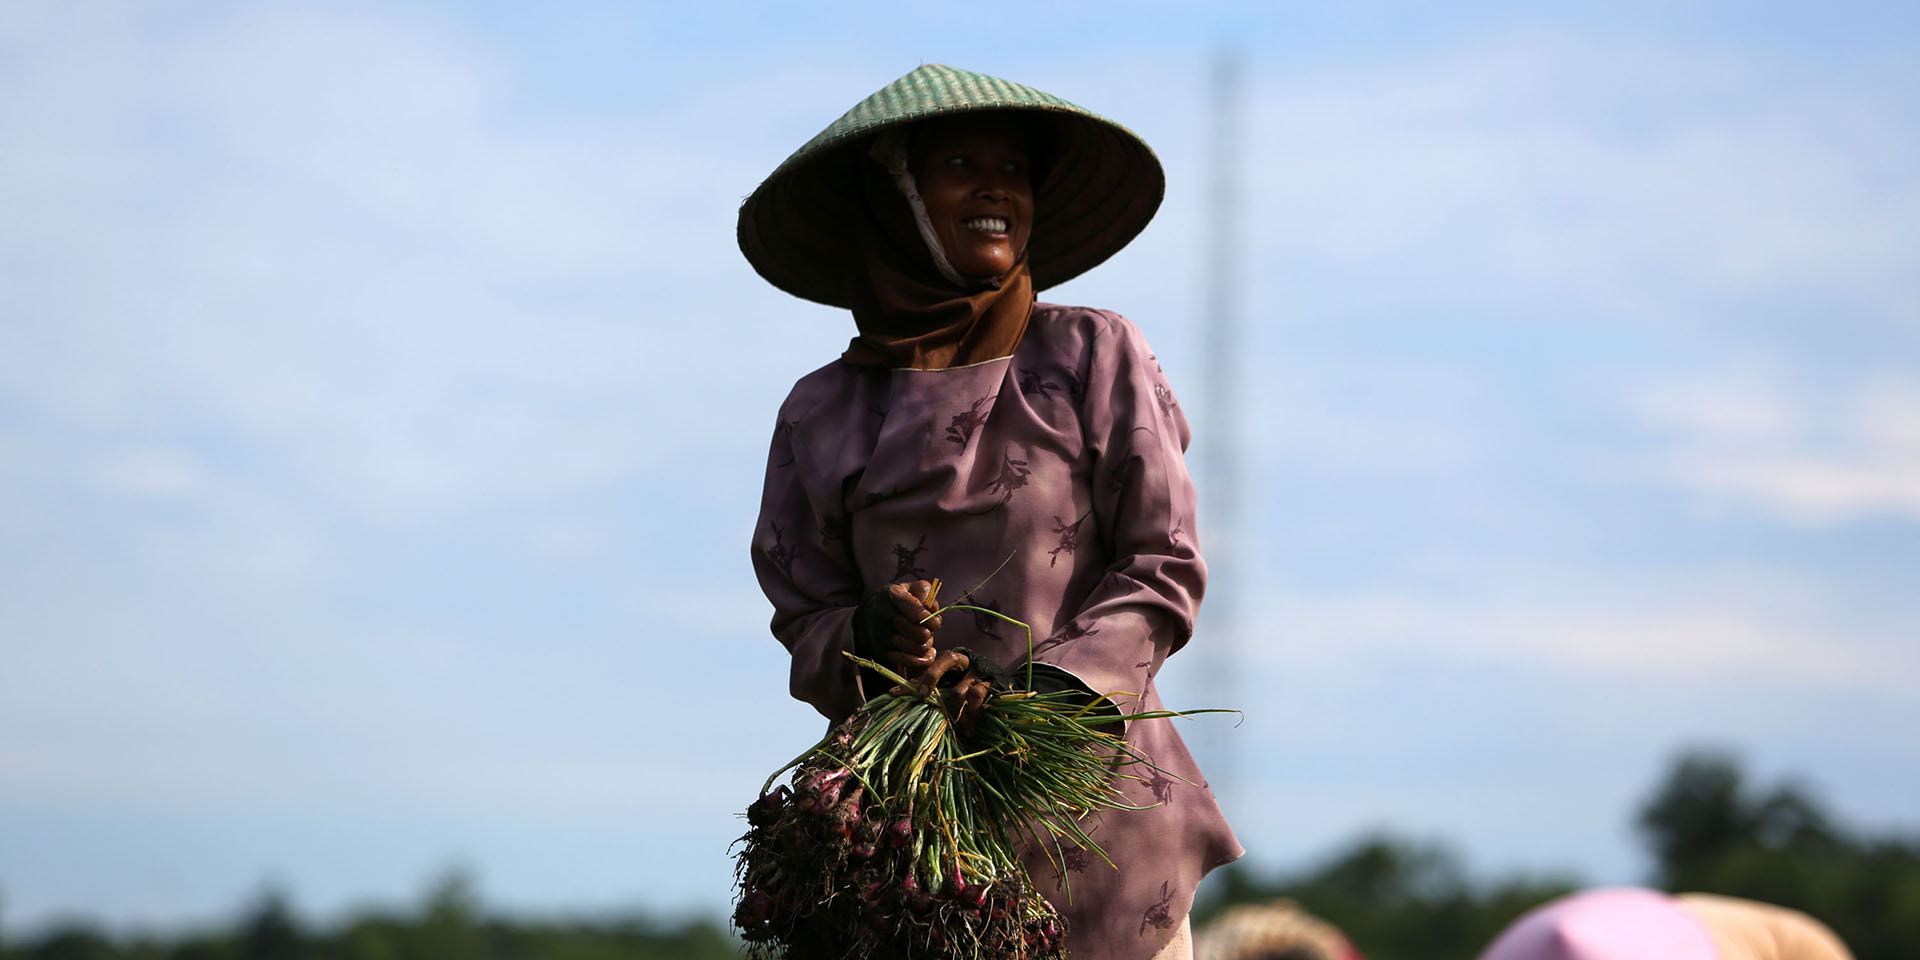 Image of a smiling farmer holding a large bushel of crops in her hands.